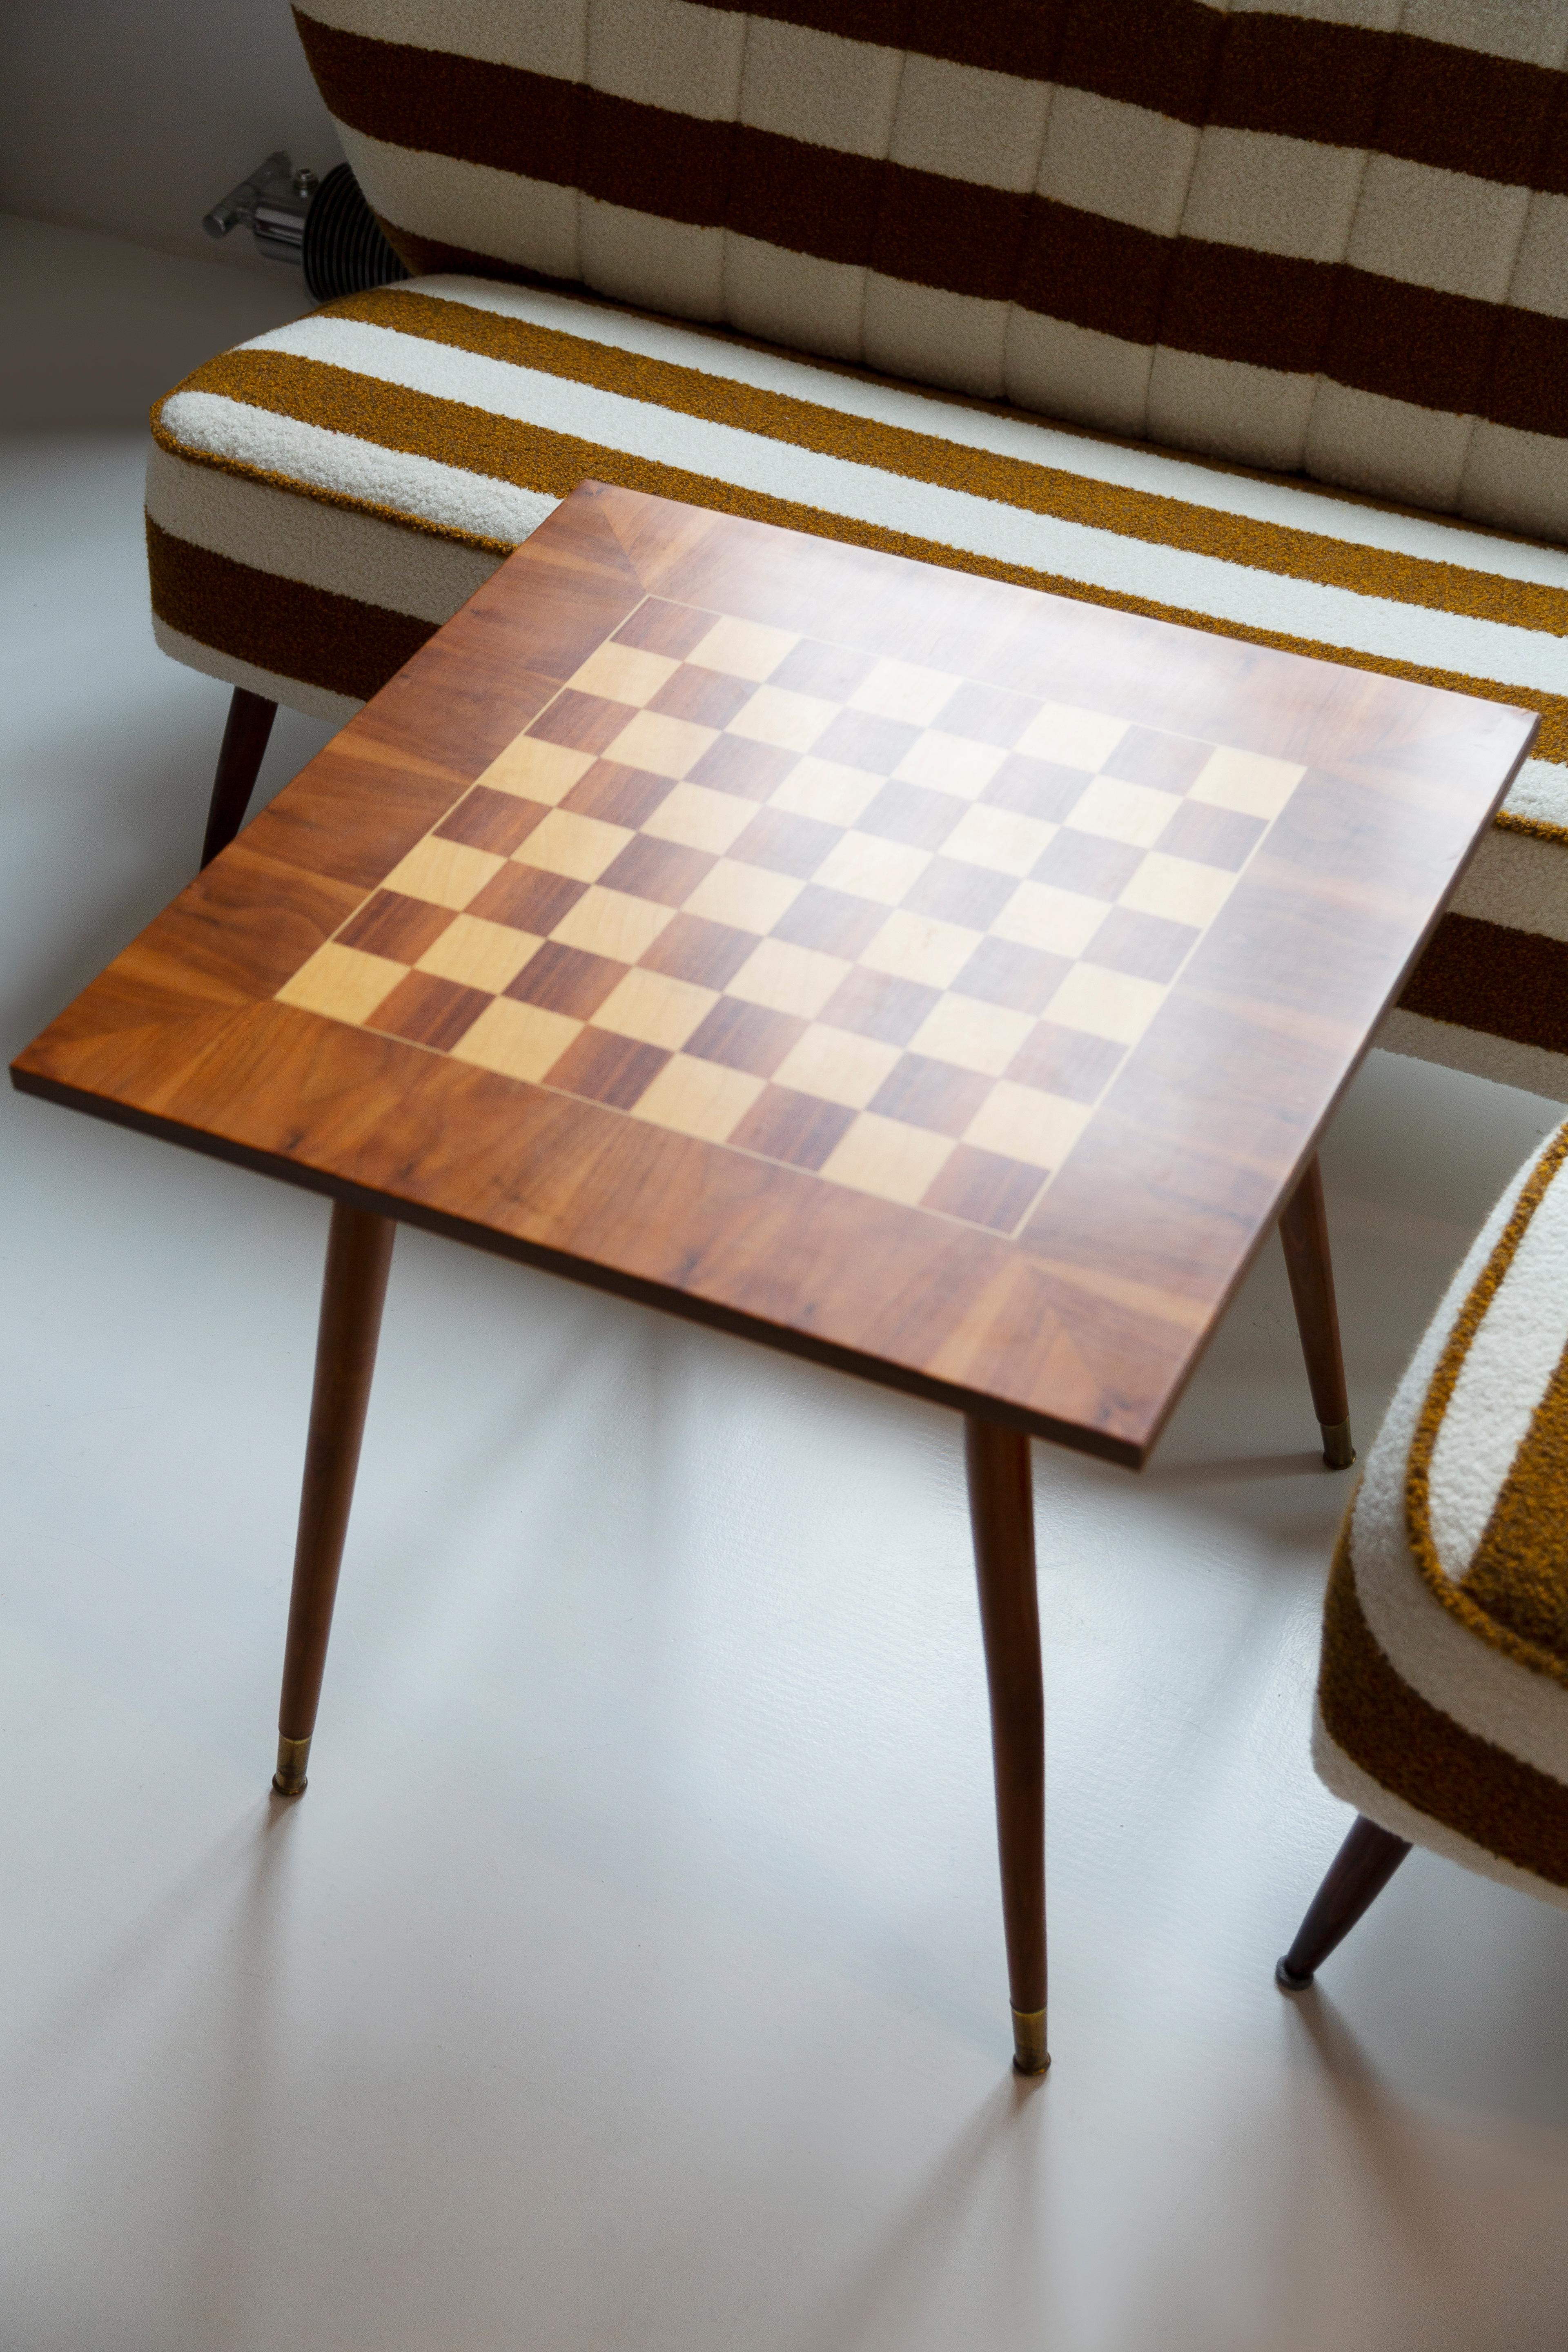 Beautiful antique chess table from the 1960s. It was manufactured in Poland in 1960s. The table was made of wood and veneer plywood, it was refreshed. Very good original vintage condition.